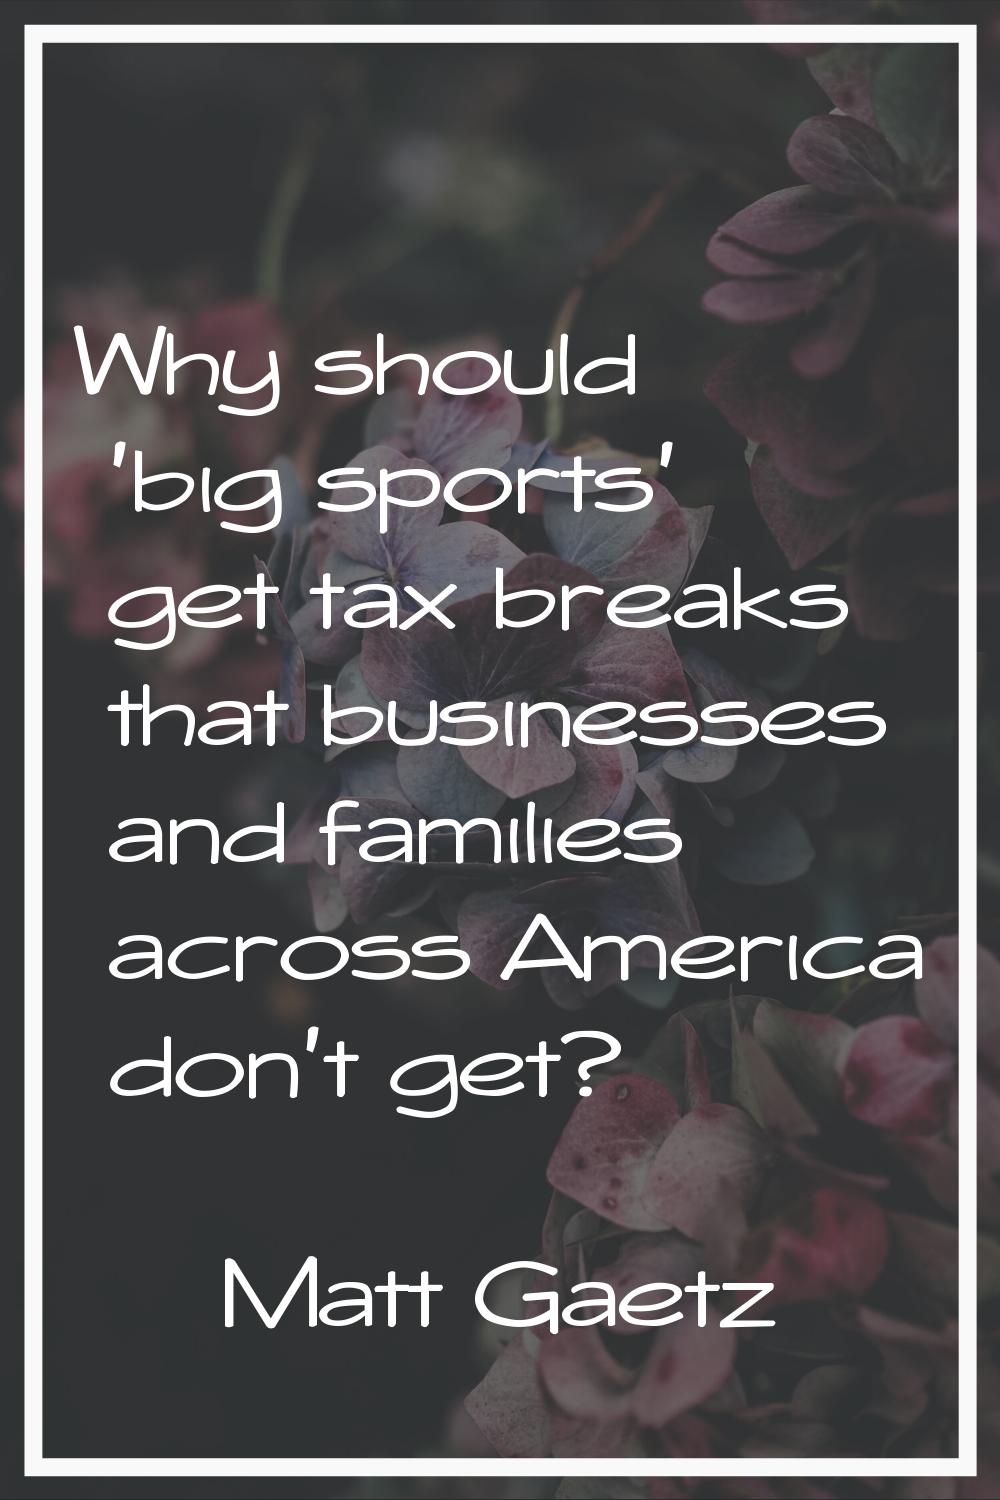 Why should 'big sports' get tax breaks that businesses and families across America don't get?